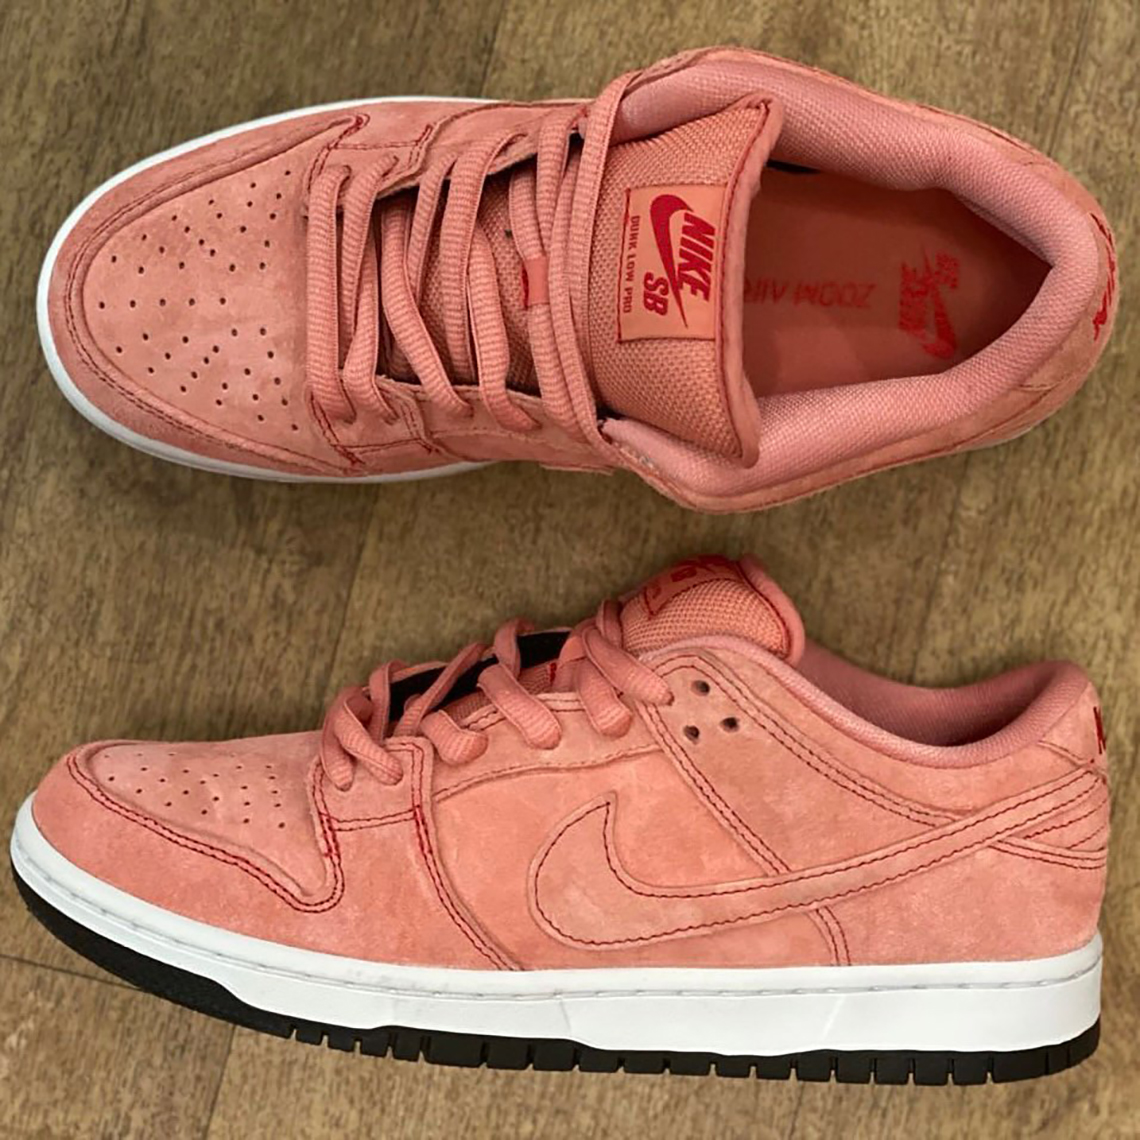 Nike Sb Dunk Low Pink Pig 2021 Release Info 3